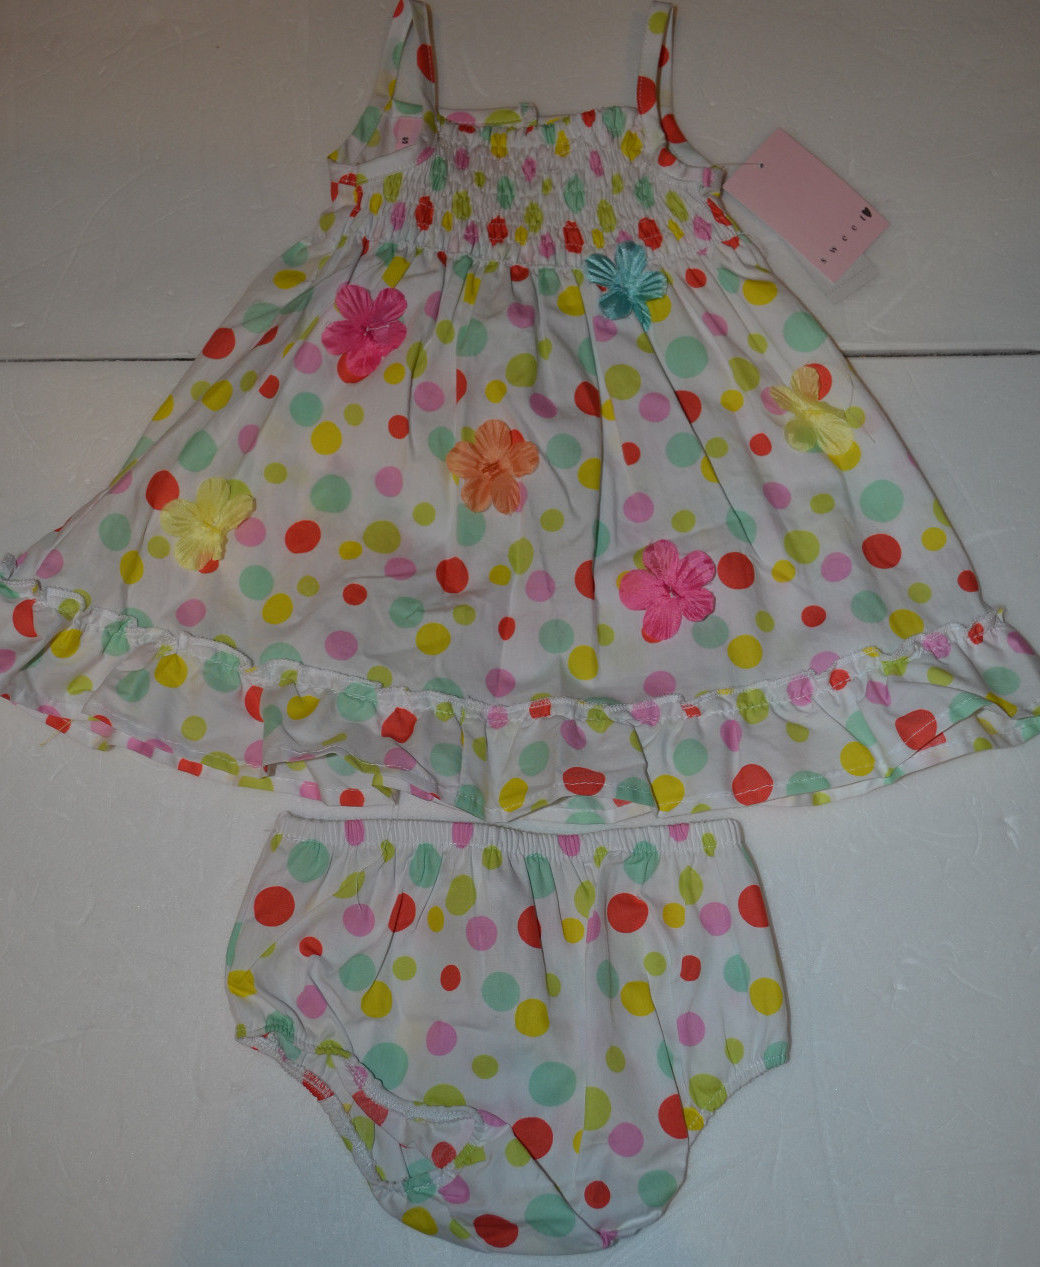 Sweet Girls Infant Toddler Dress Size 12M or 18M or 24M  NWTPolka Dots & Flowers - $14.99